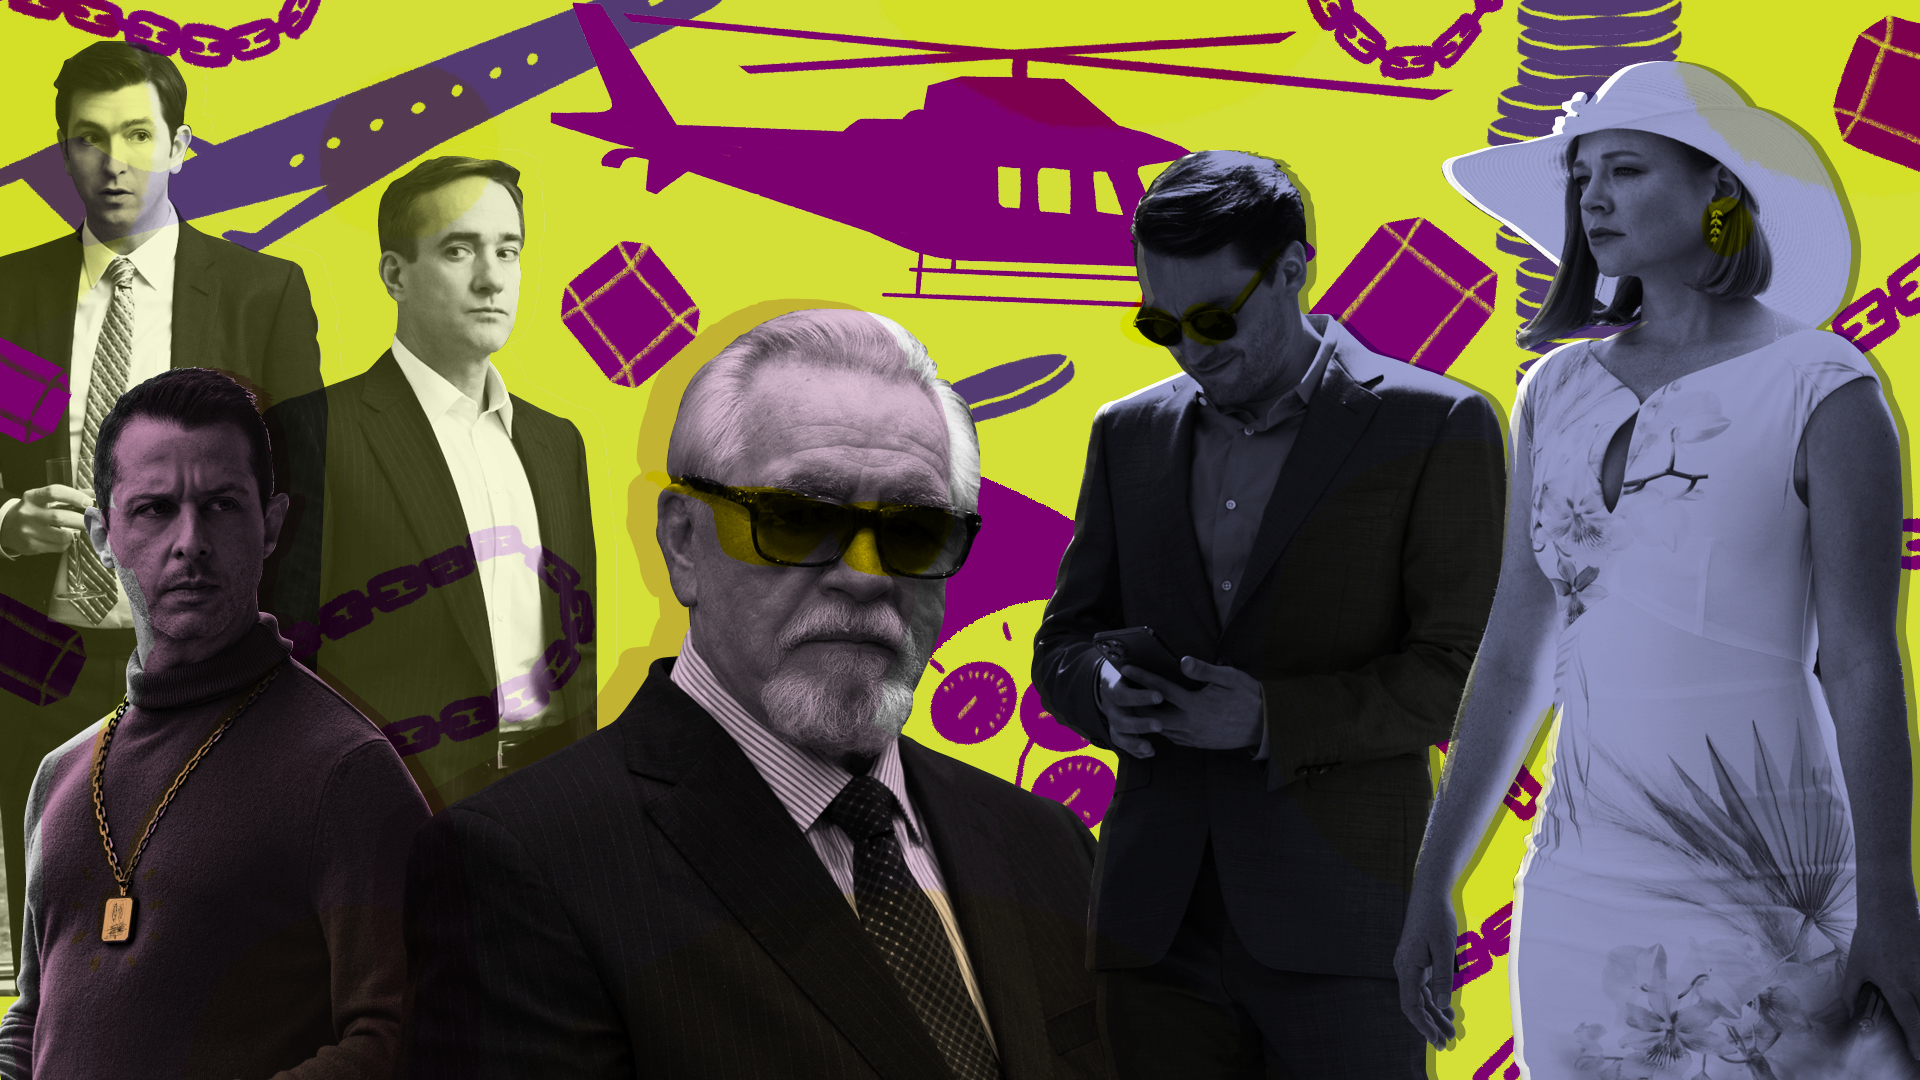 Photo collage of the actors in the HBO show “Succession” against a backdrop of cartoon symbols of wealth, including a helicopter, a private jet, and diamonds.